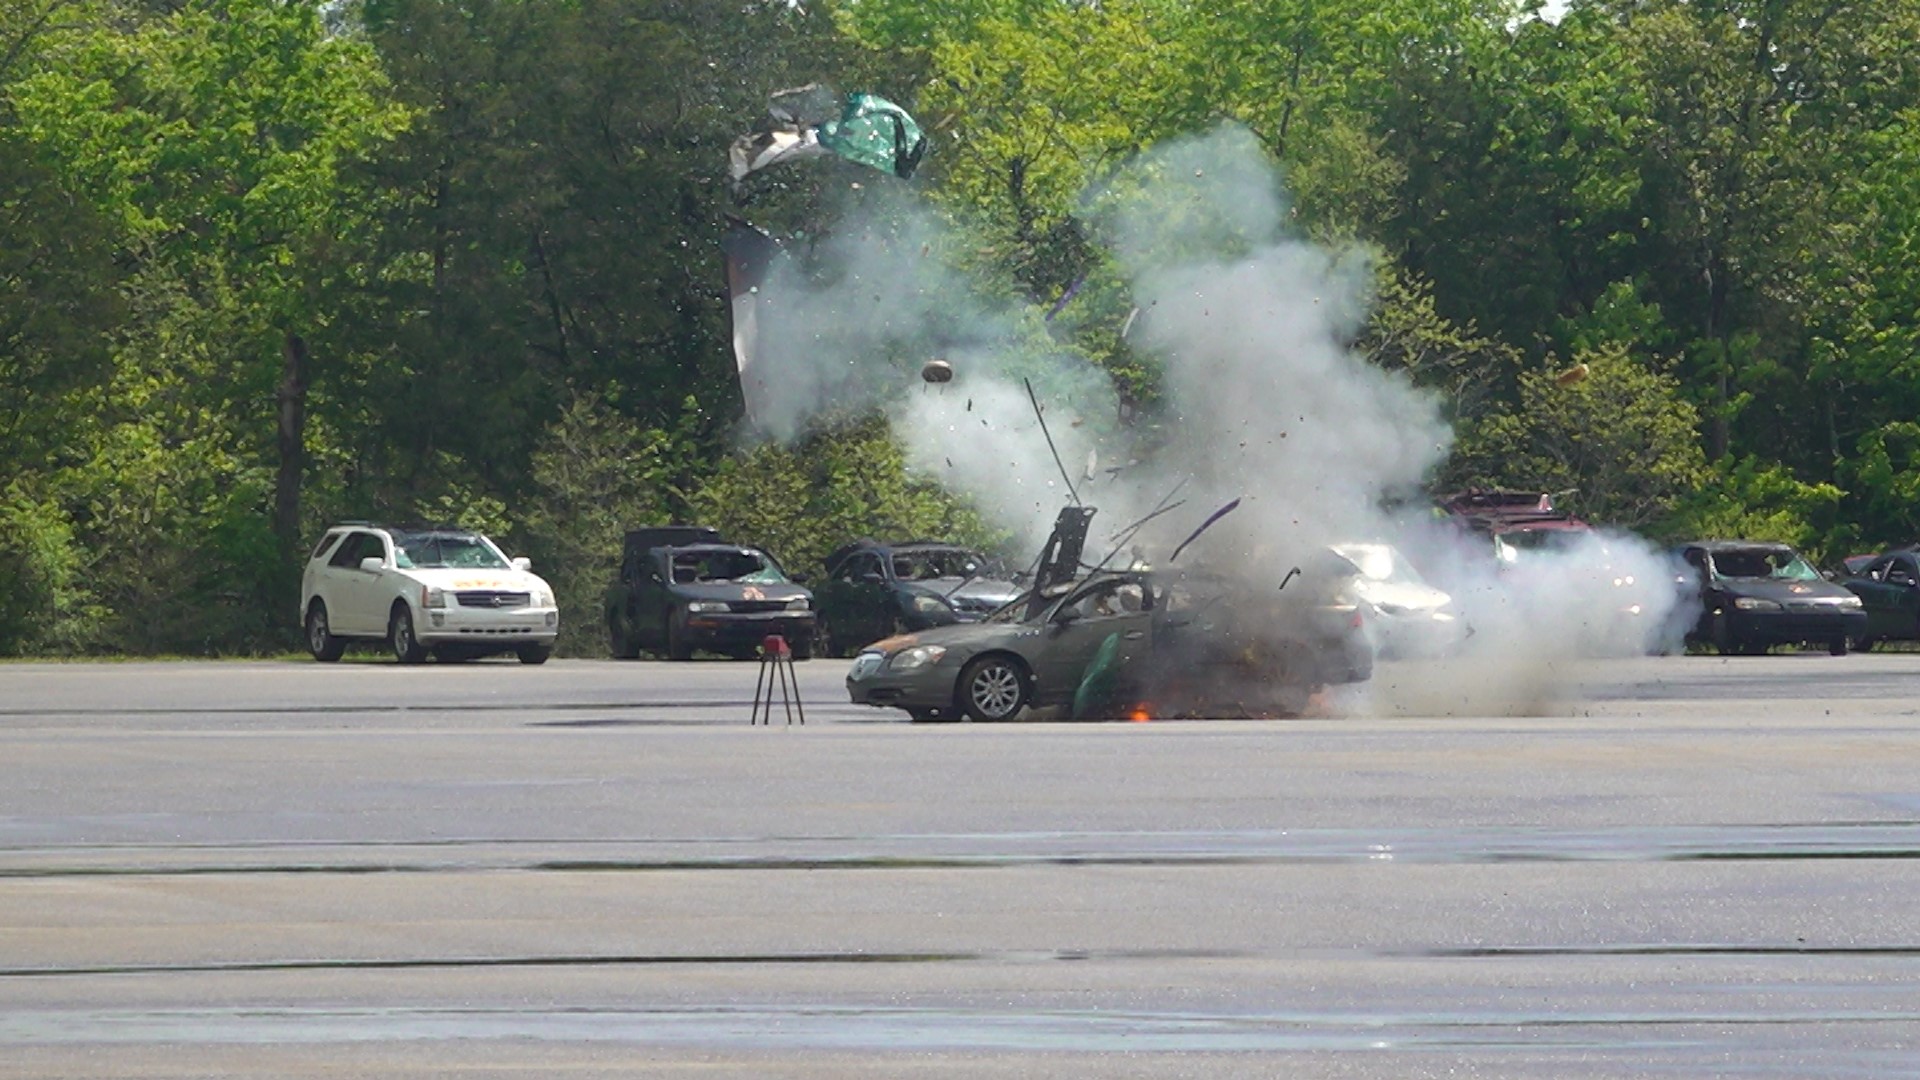 Controlled explosions were carried out at Redstone Arsenal as investigators learn how to process the scenes of violent crimes.